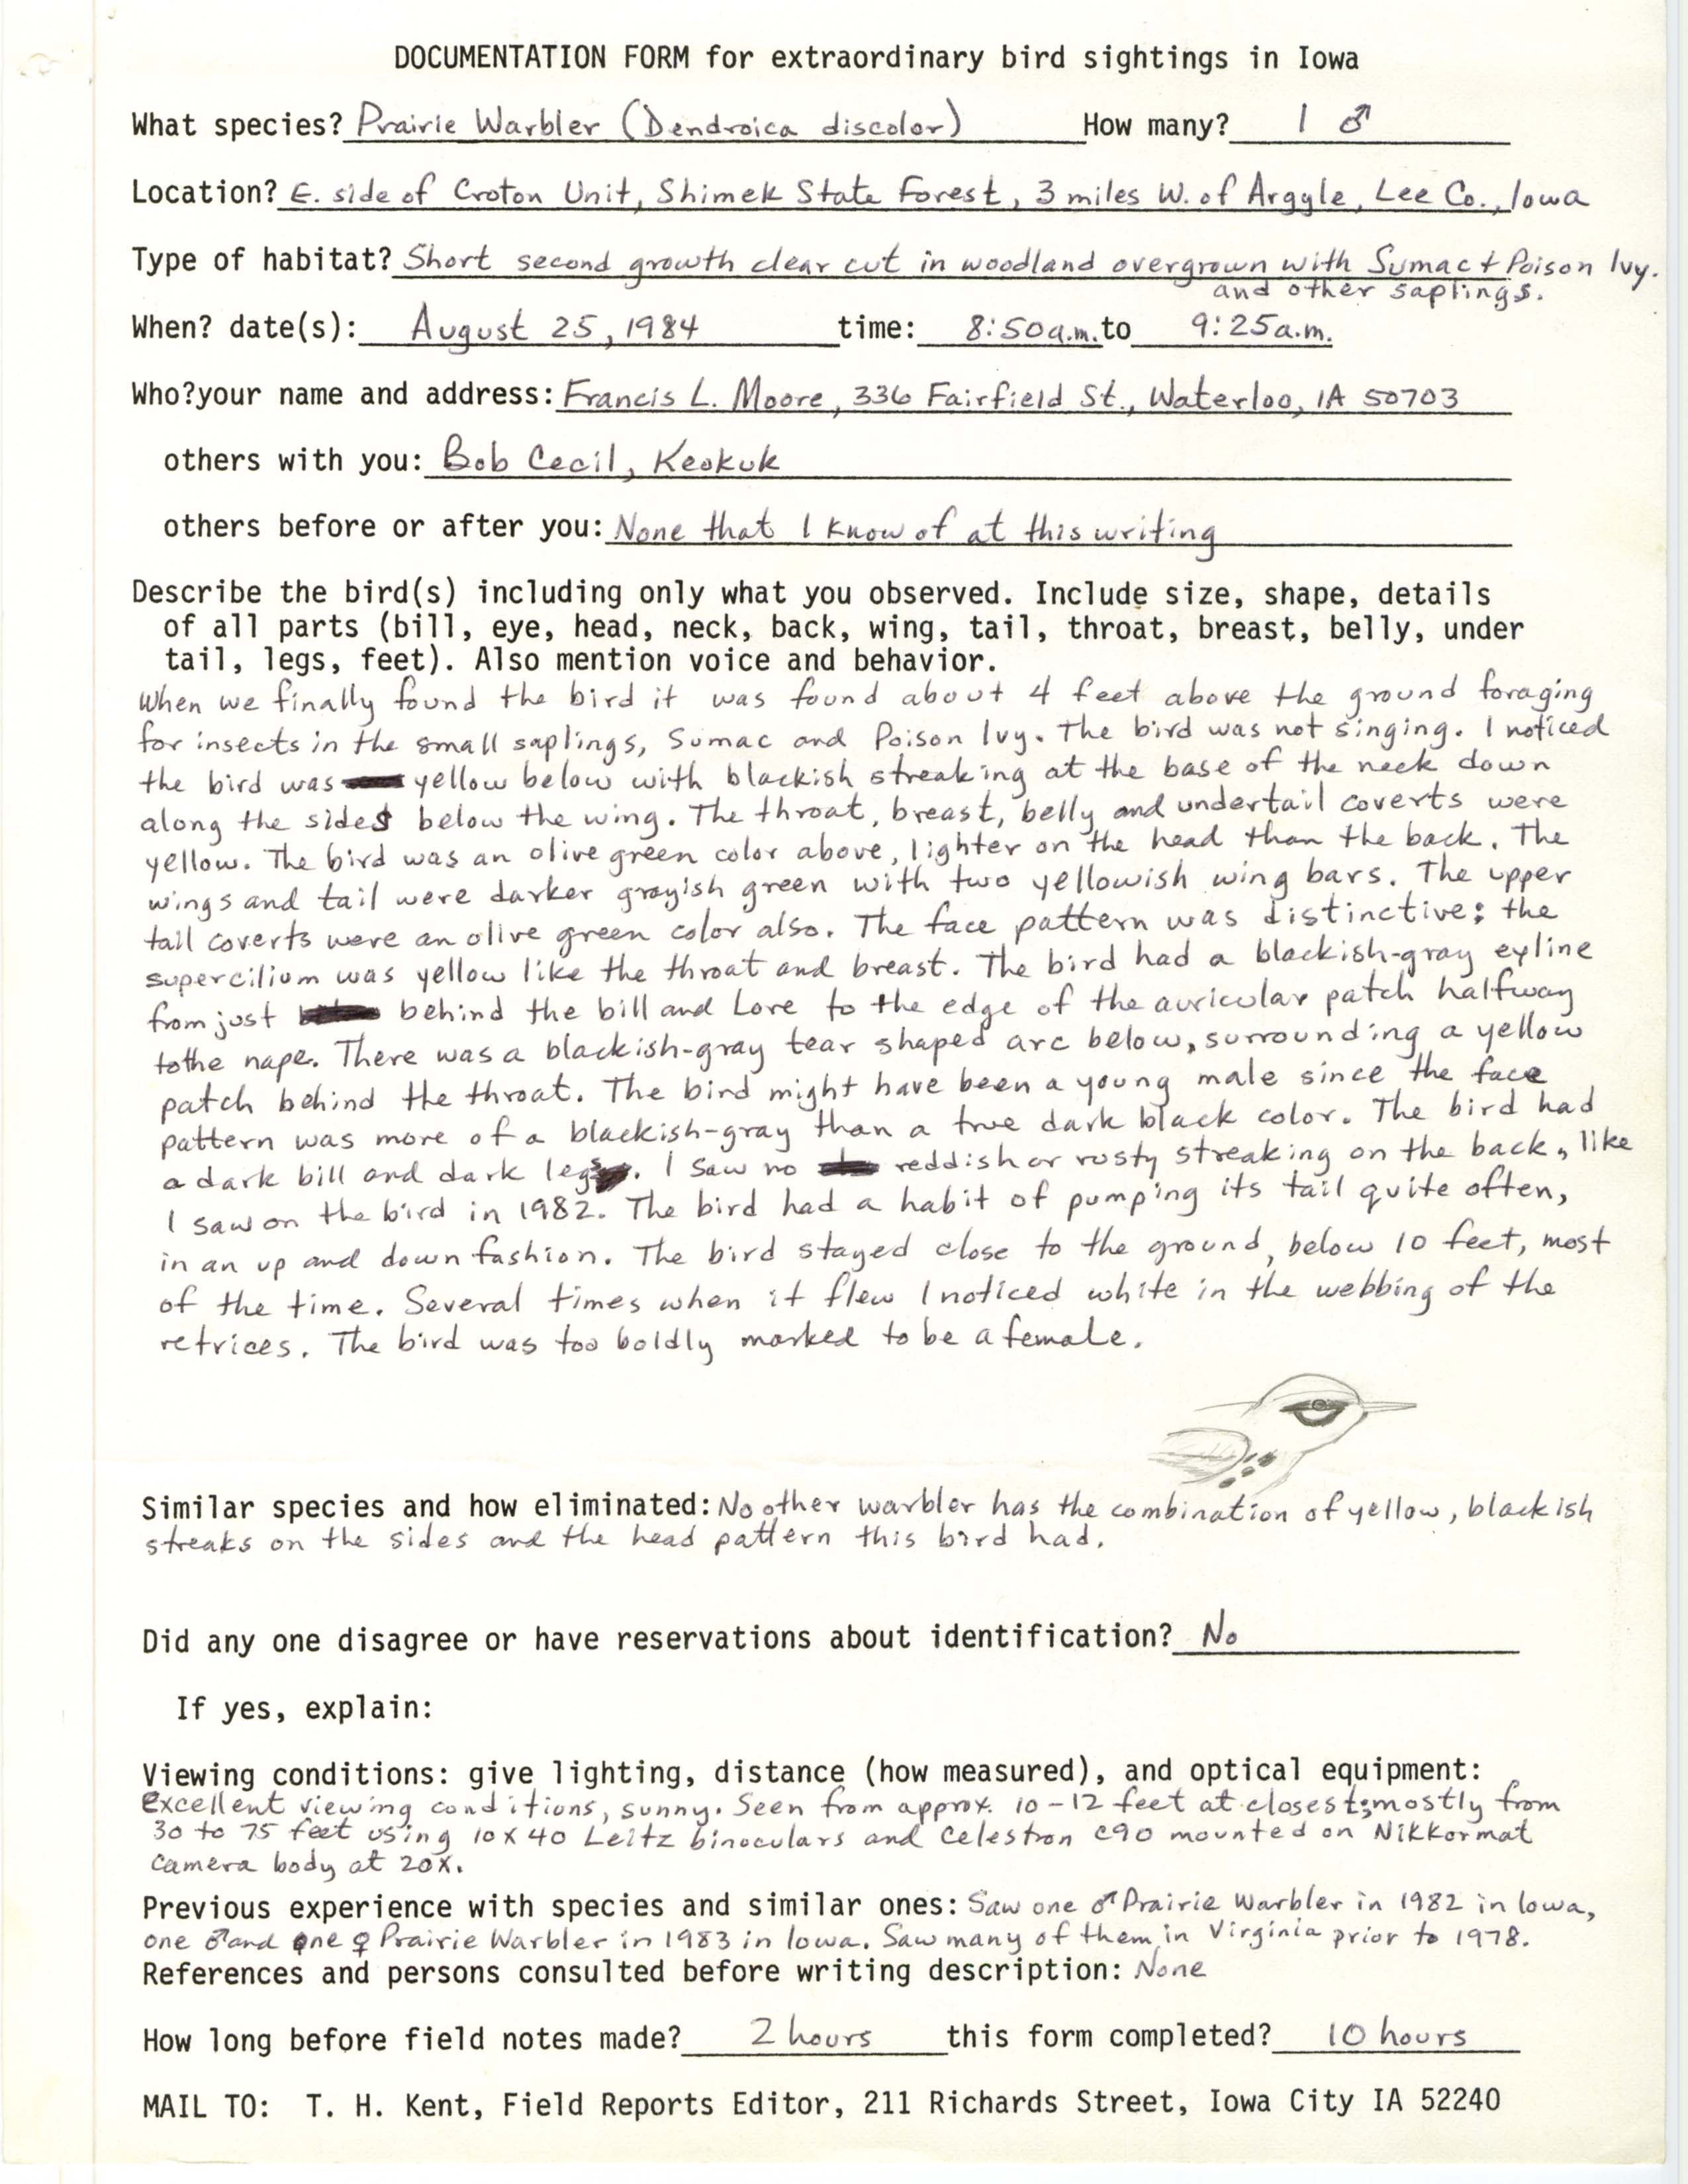 Rare bird documentation form for Prairie Warbler at the Croton Unit in Shimek State Forest, 1984